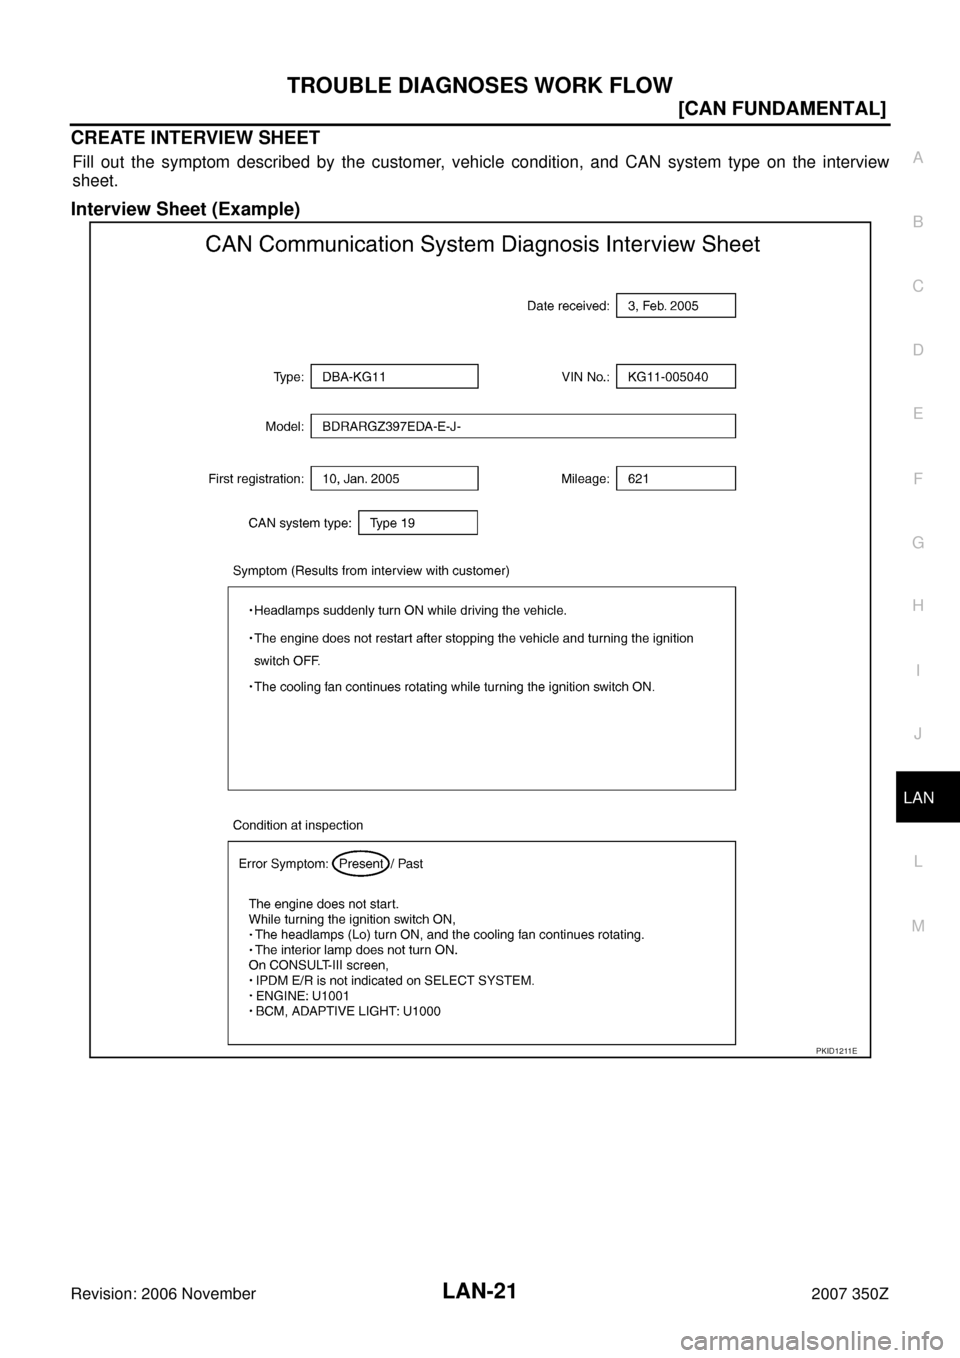 NISSAN 350Z 2007 Z33 LAN System Owners Manual TROUBLE DIAGNOSES WORK FLOW
LAN-21
[CAN FUNDAMENTAL]
C
D
E
F
G
H
I
J
L
MA
B
LAN
Revision: 2006 November2007 350Z
CREATE INTERVIEW SHEET
Fill out the symptom described by the customer, vehicle conditio